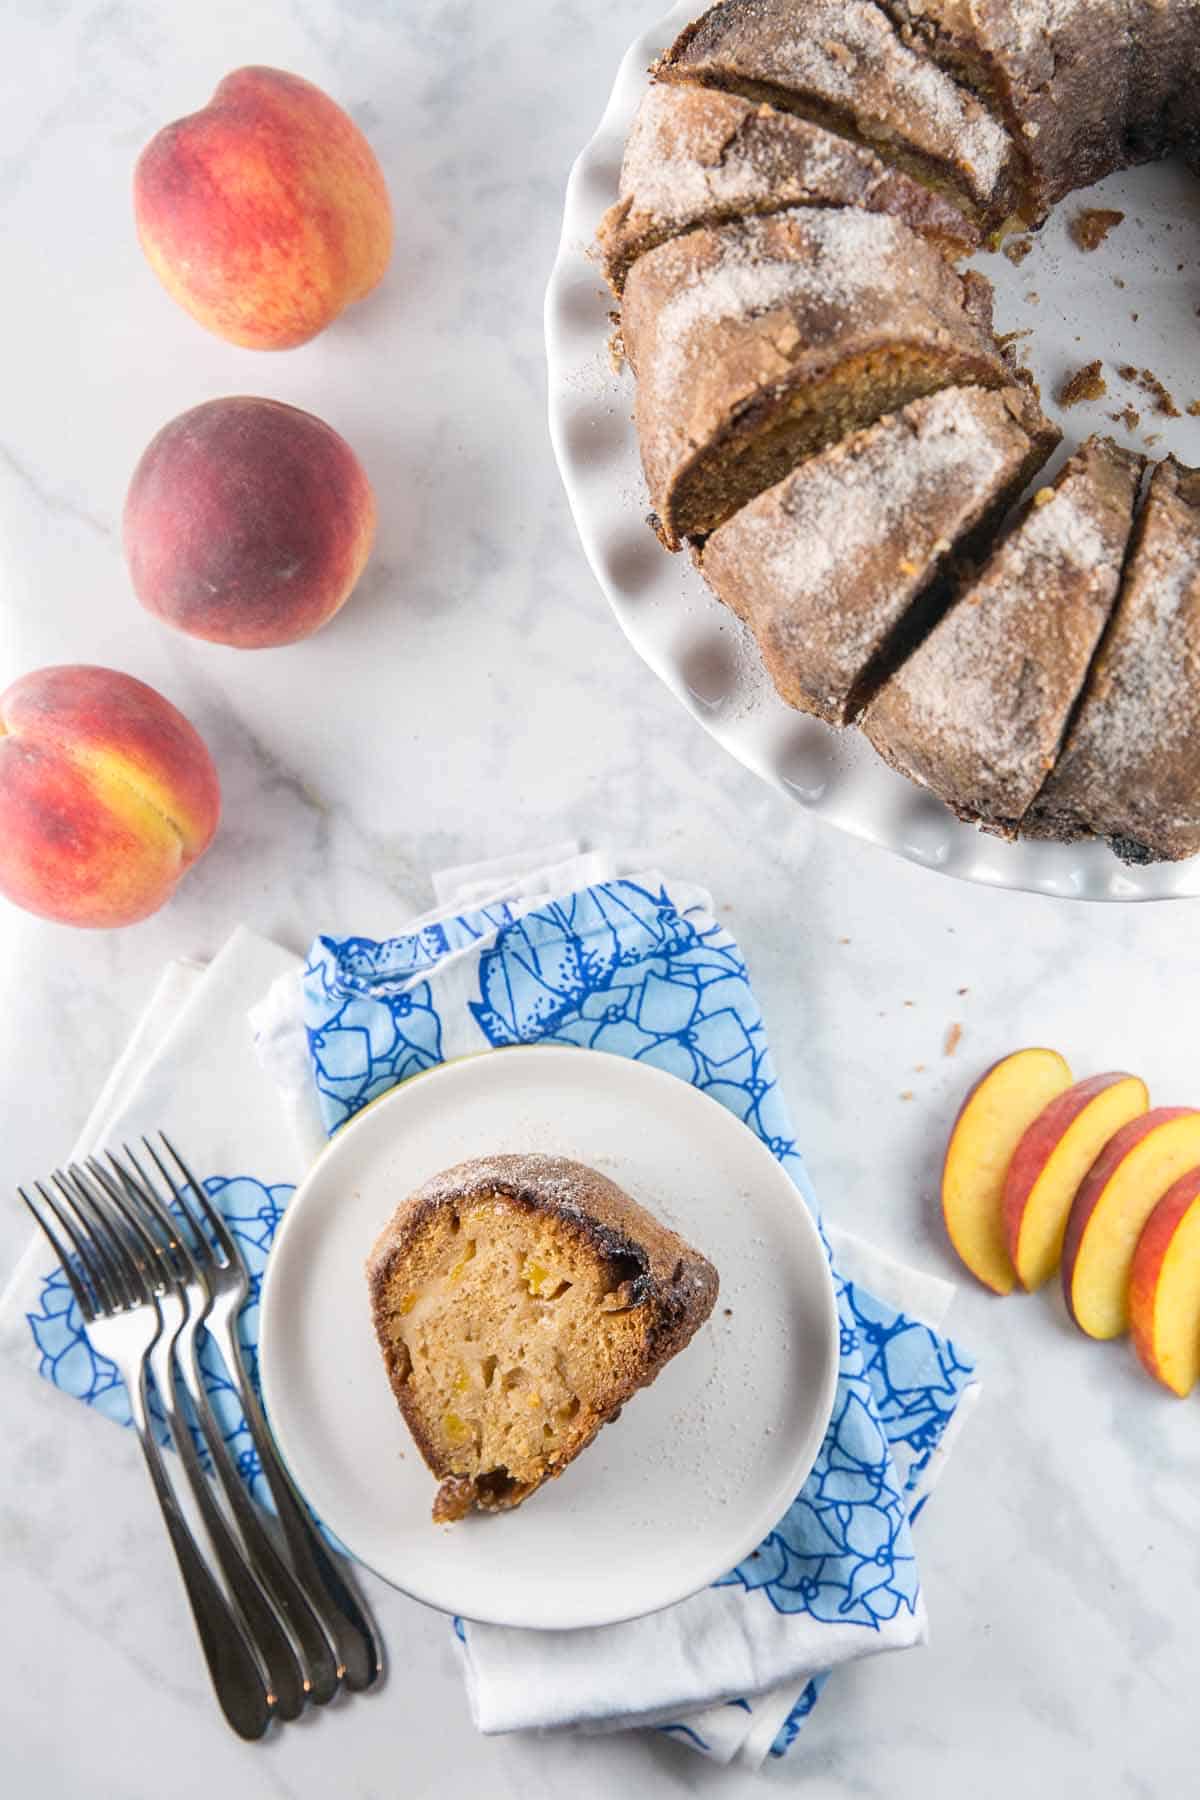 bundt cake cut into slices with one slice on a plate next to whole and sliced peaches